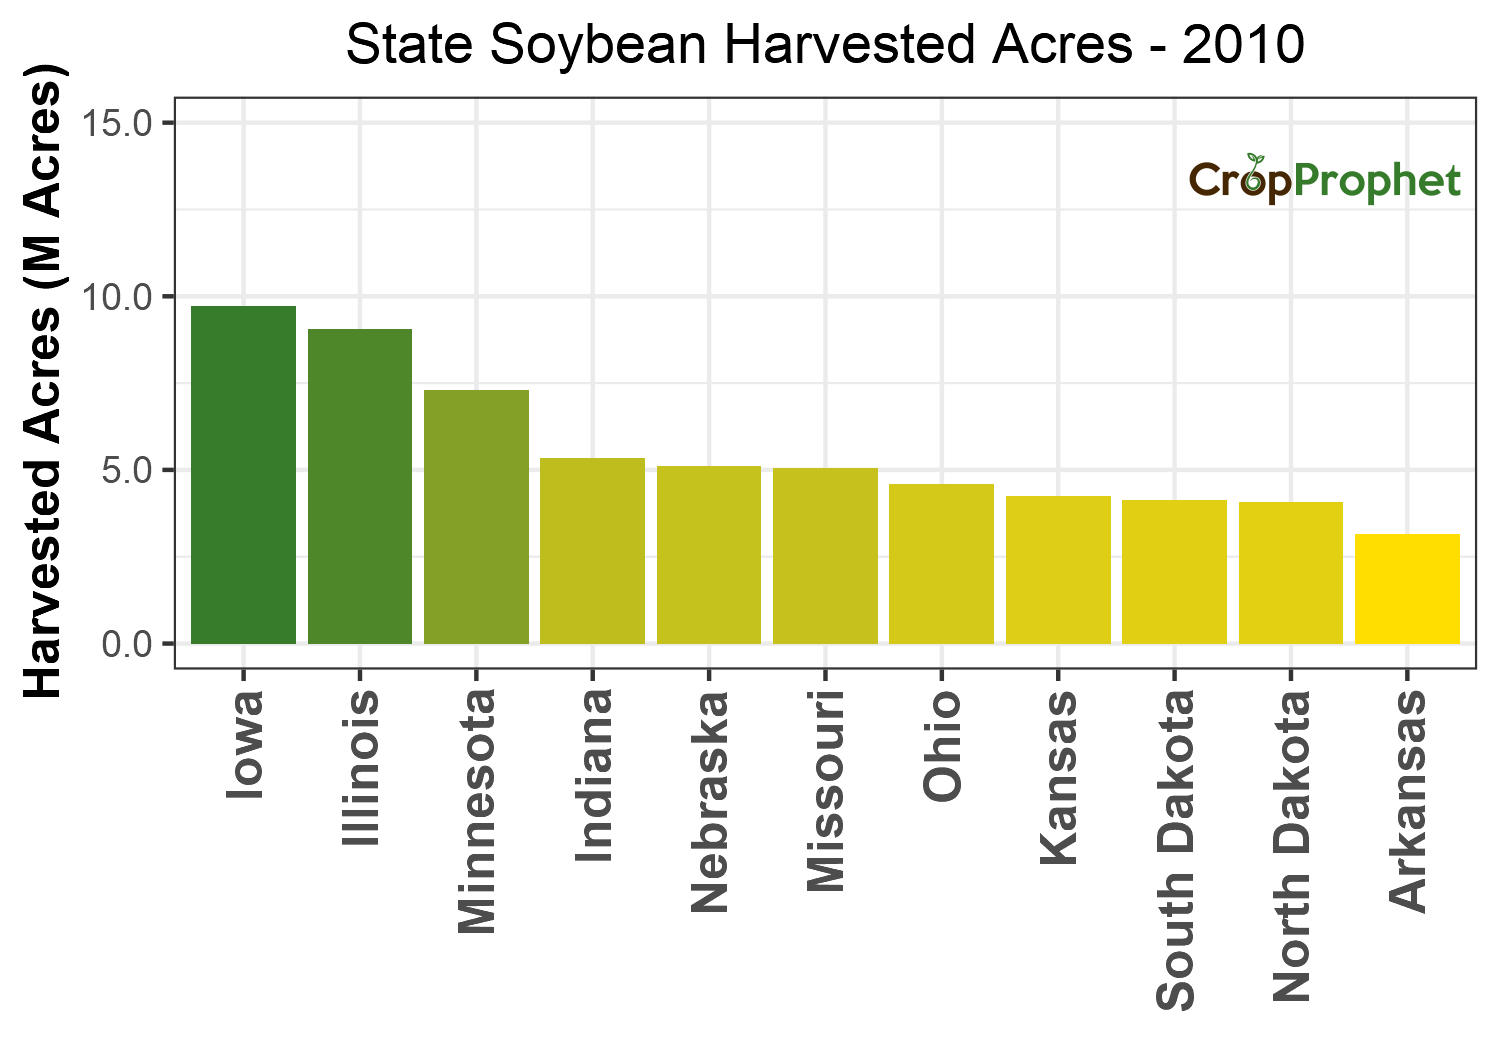 Soybean Harvested Acres by State - 2010 Rankings